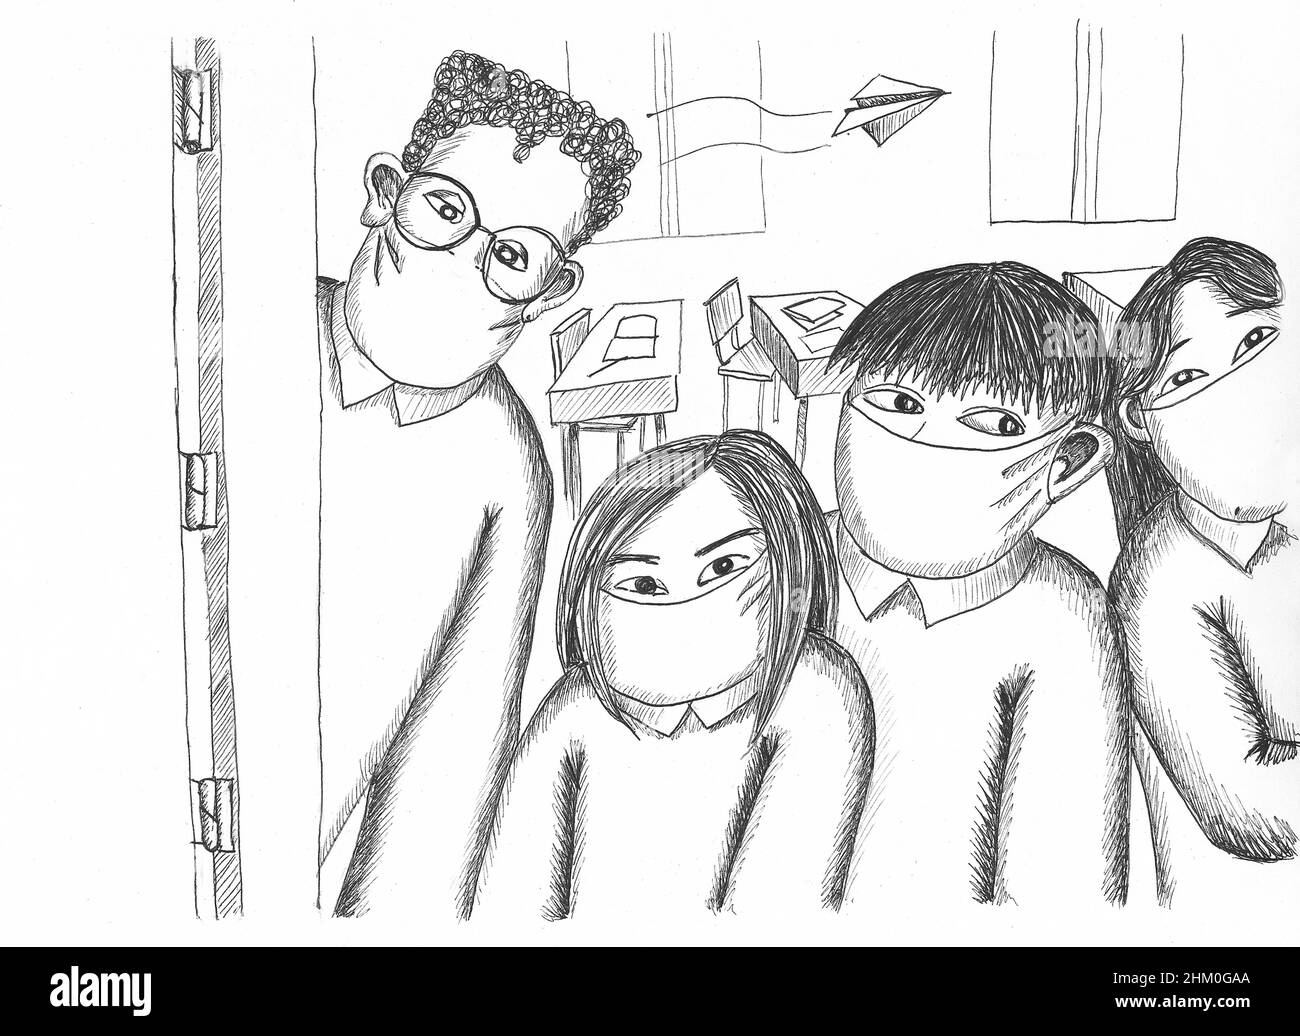 Four students at their classroom door.Illustration. Stock Photo